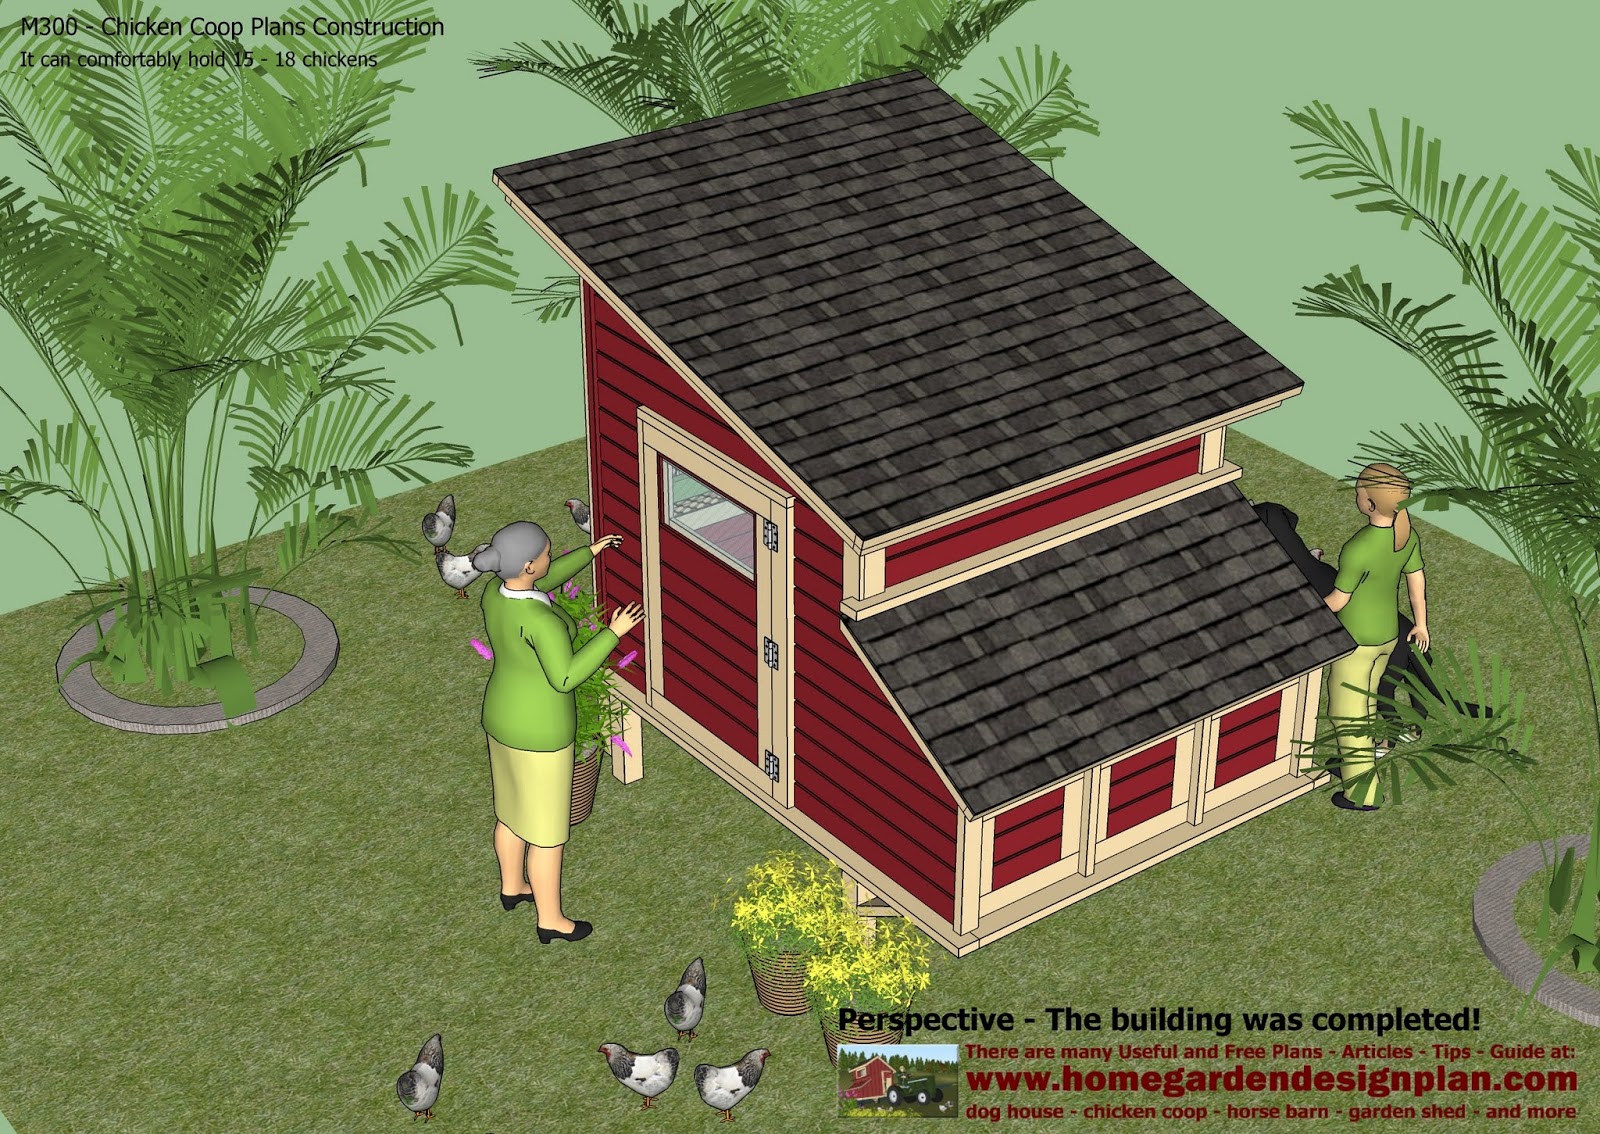 Build a coop blog: How to build a chicken coop plans free